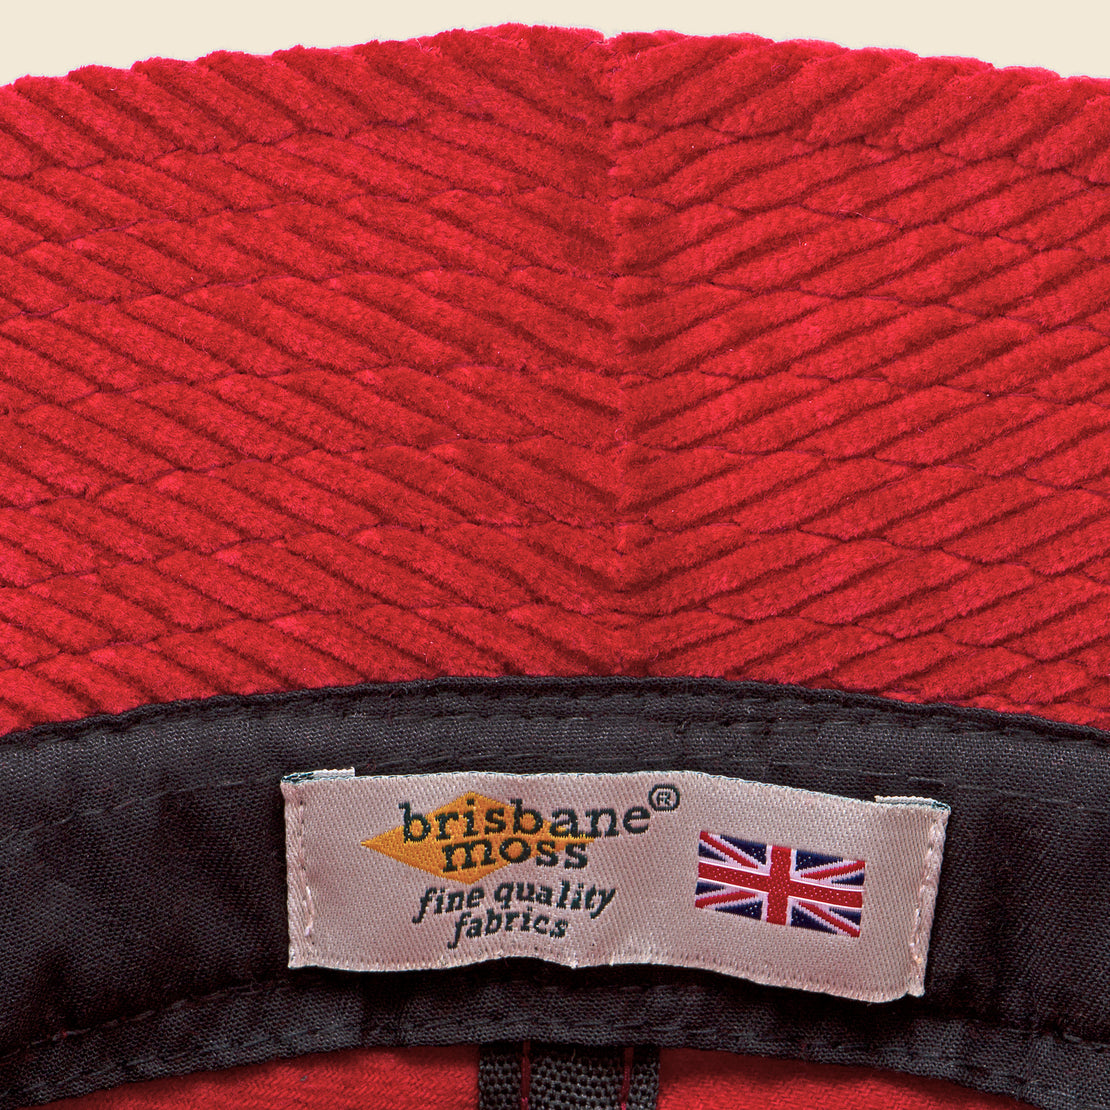 Brisbane Cord Bucket Hat - Red - Universal Works - STAG Provisions - Accessories - Hats